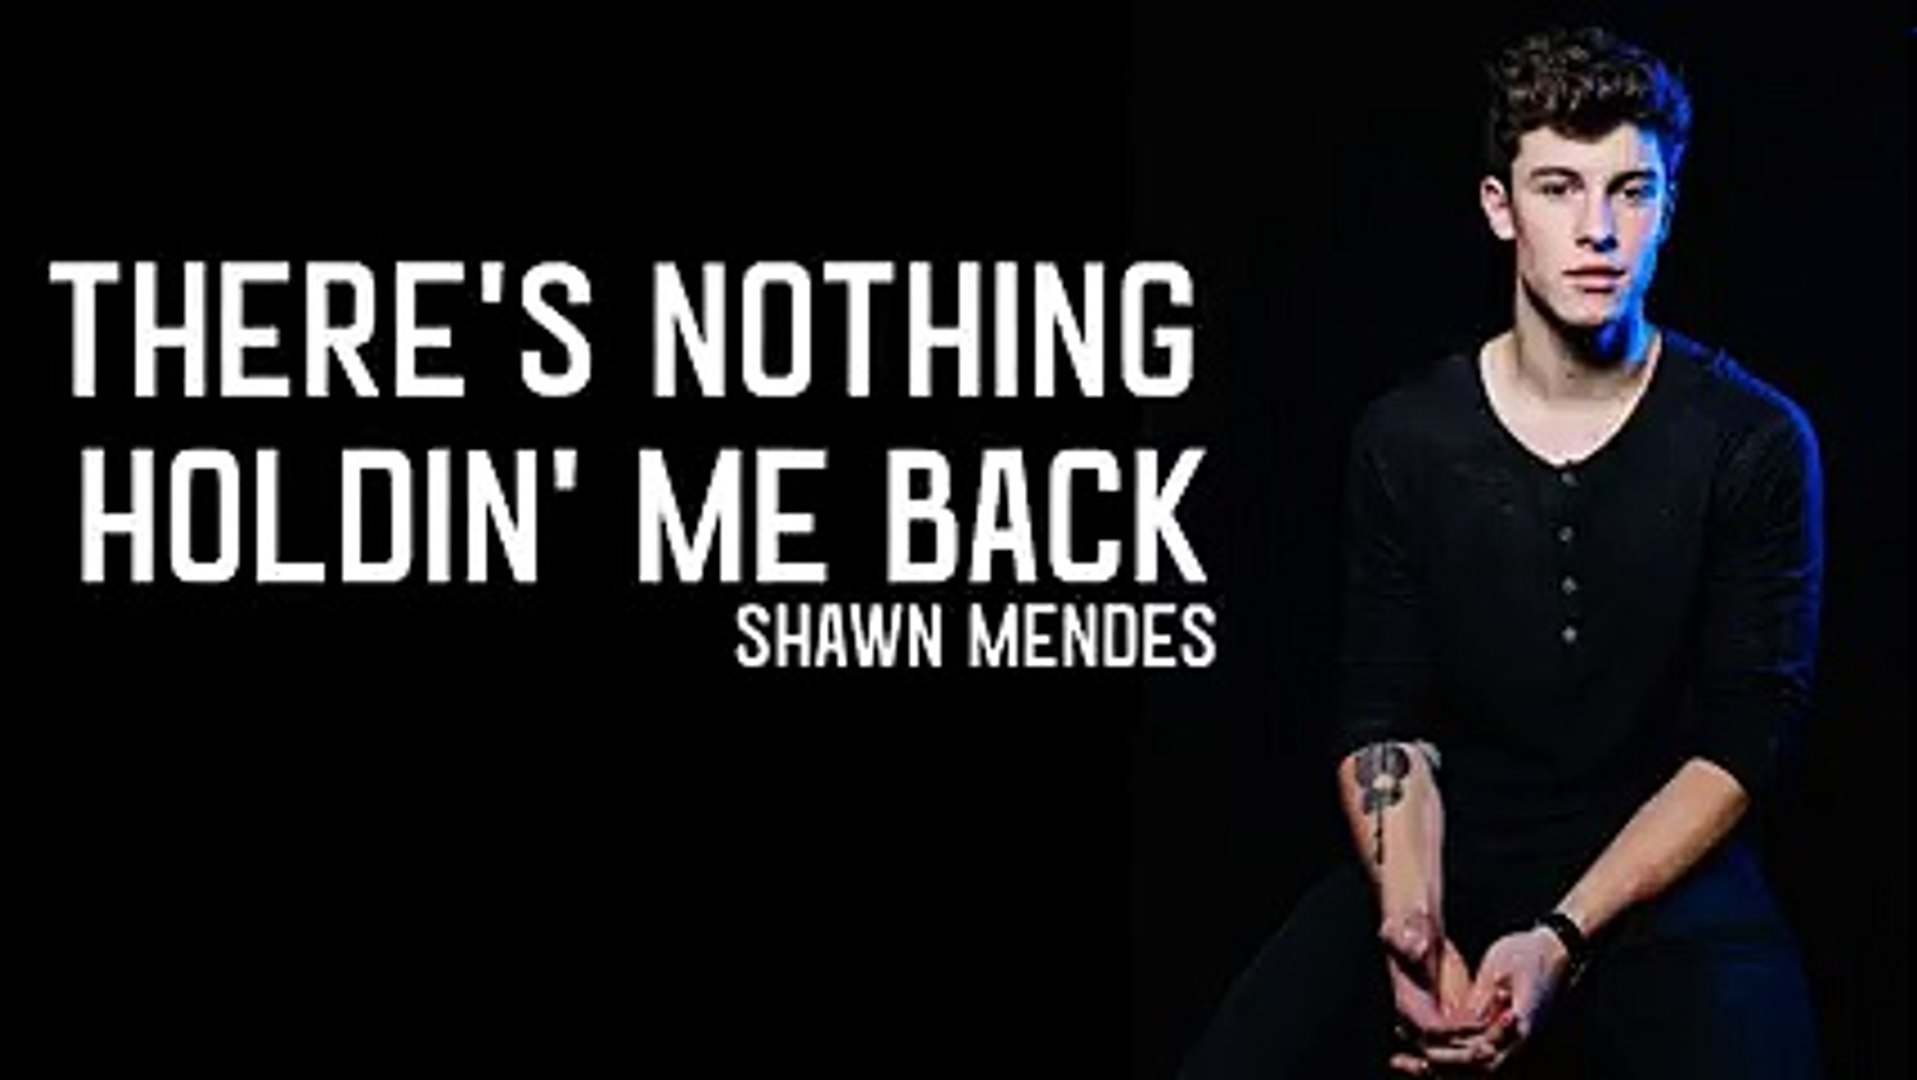 Shawn Mendes - There's Nothing Holdin' Me Back (Lyrics) - Vidéo Dailymotion